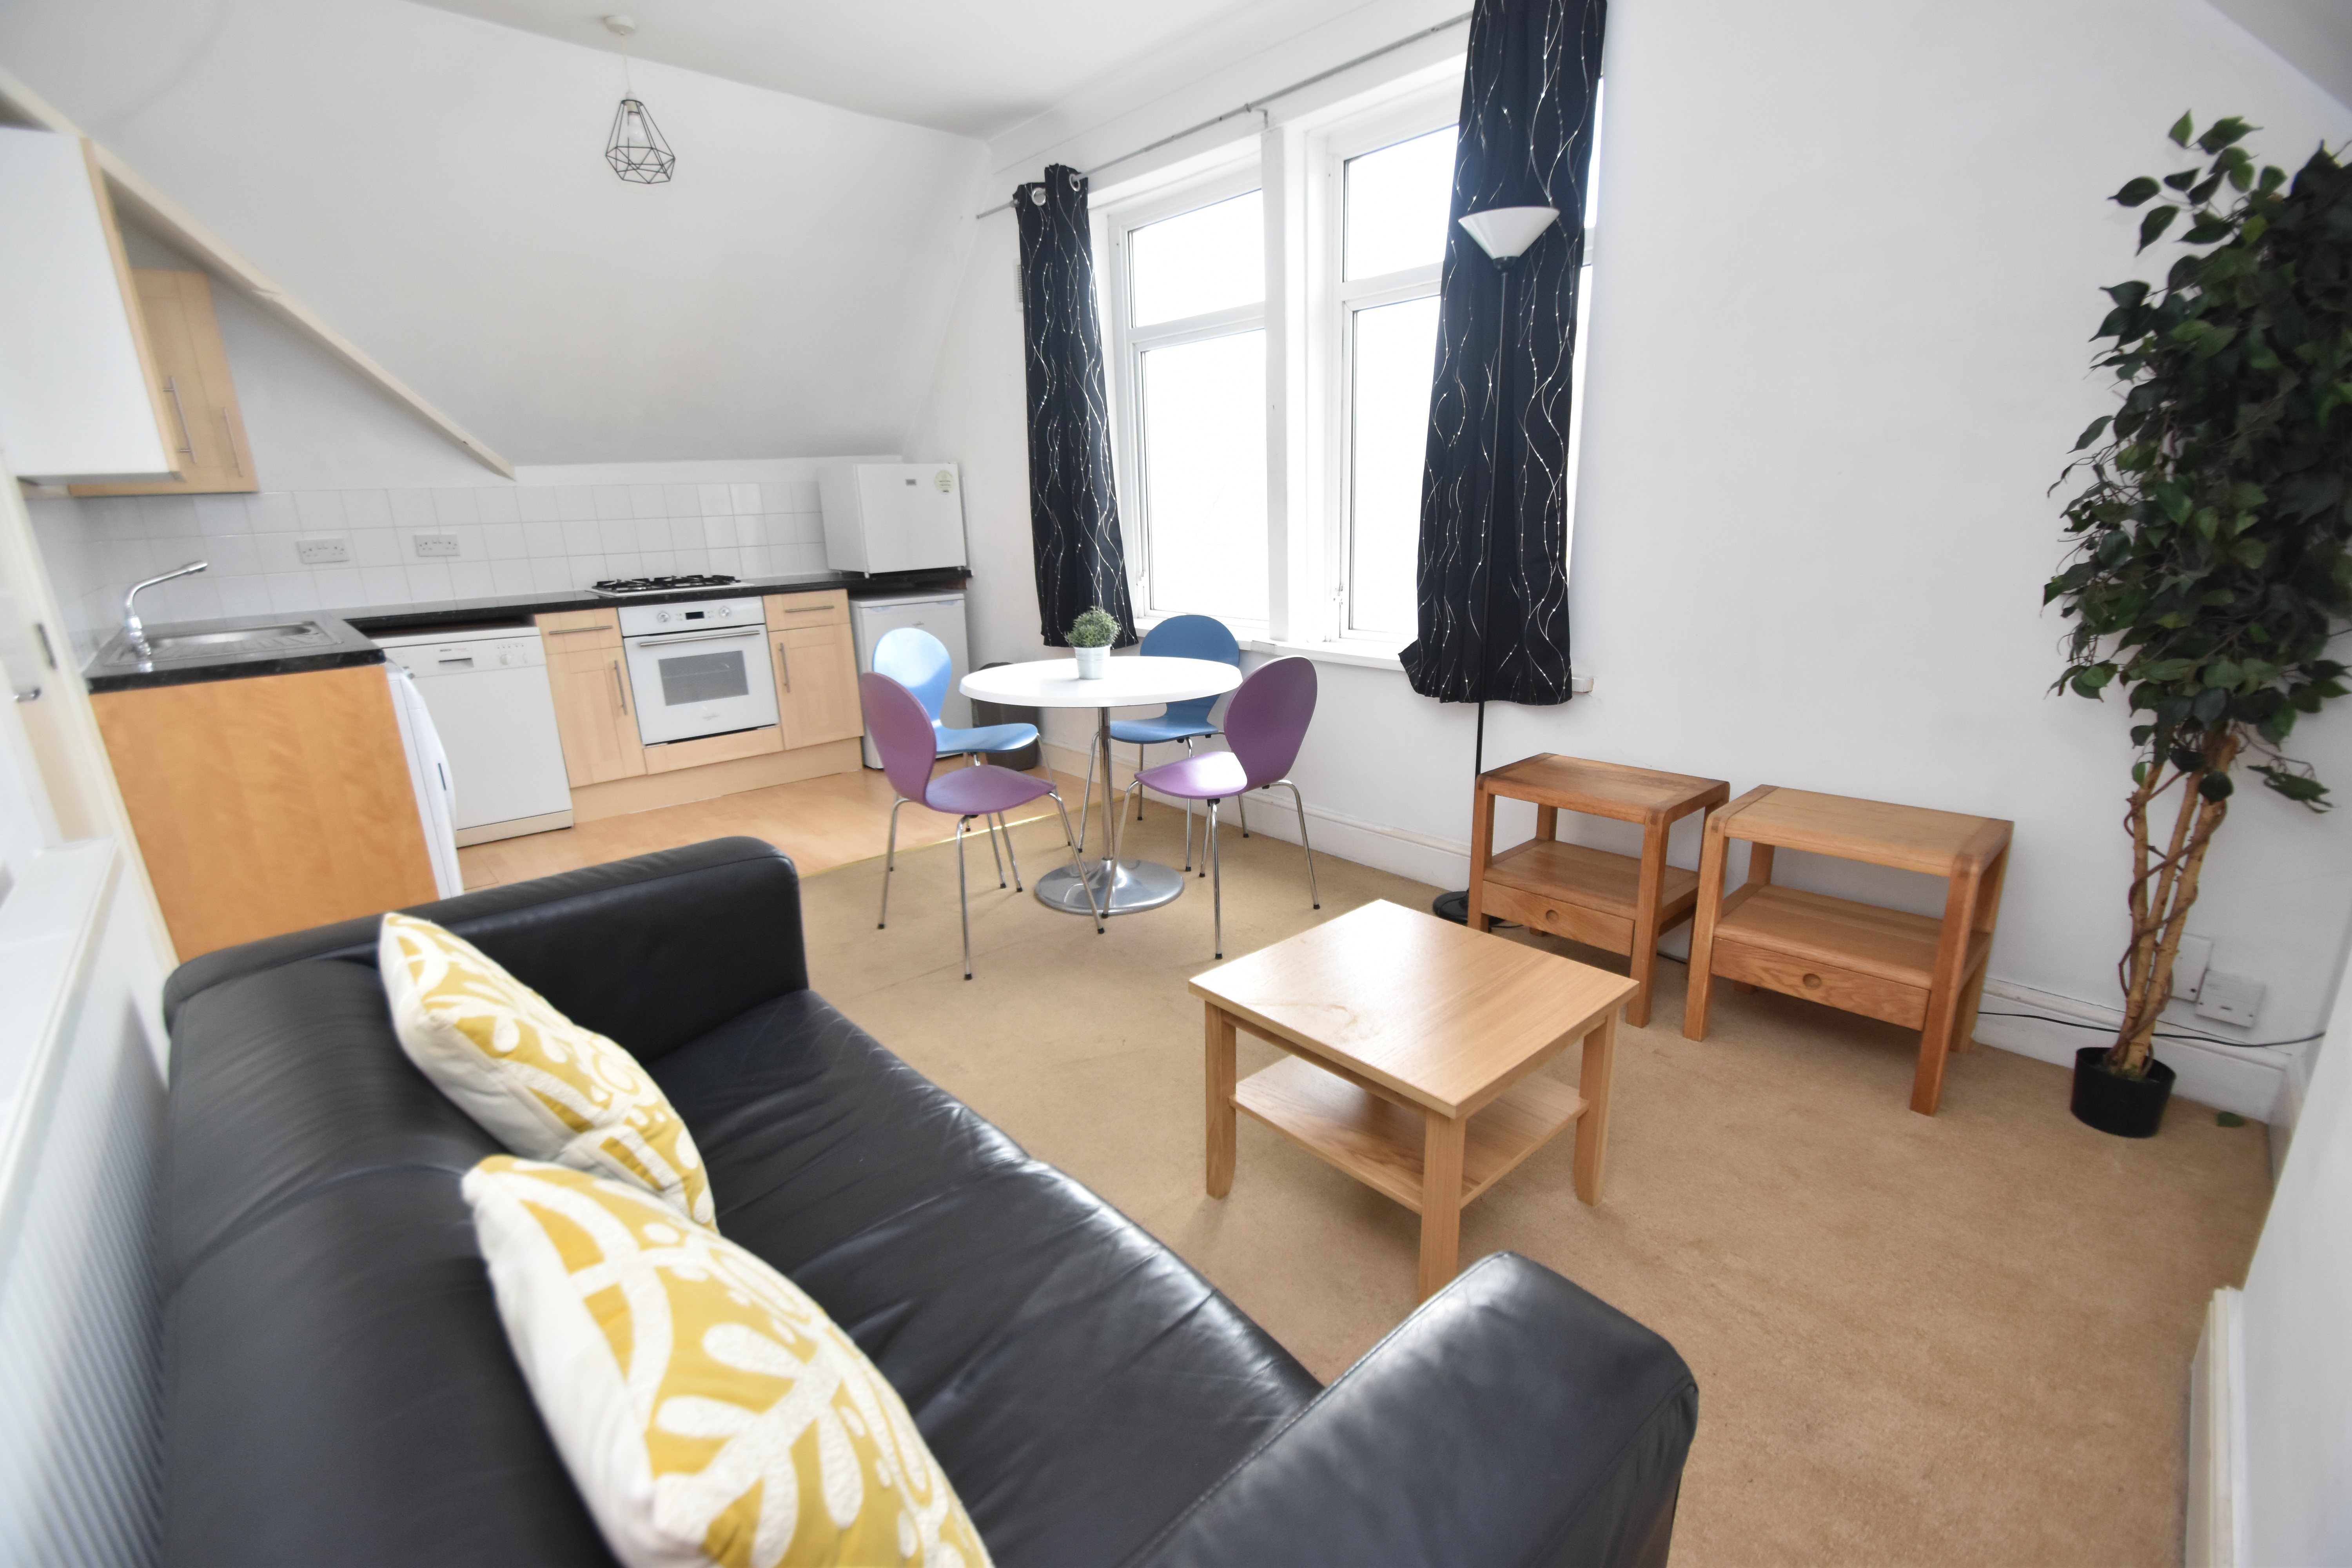 1 bed flat to rent in Malefant street, Cathays 0